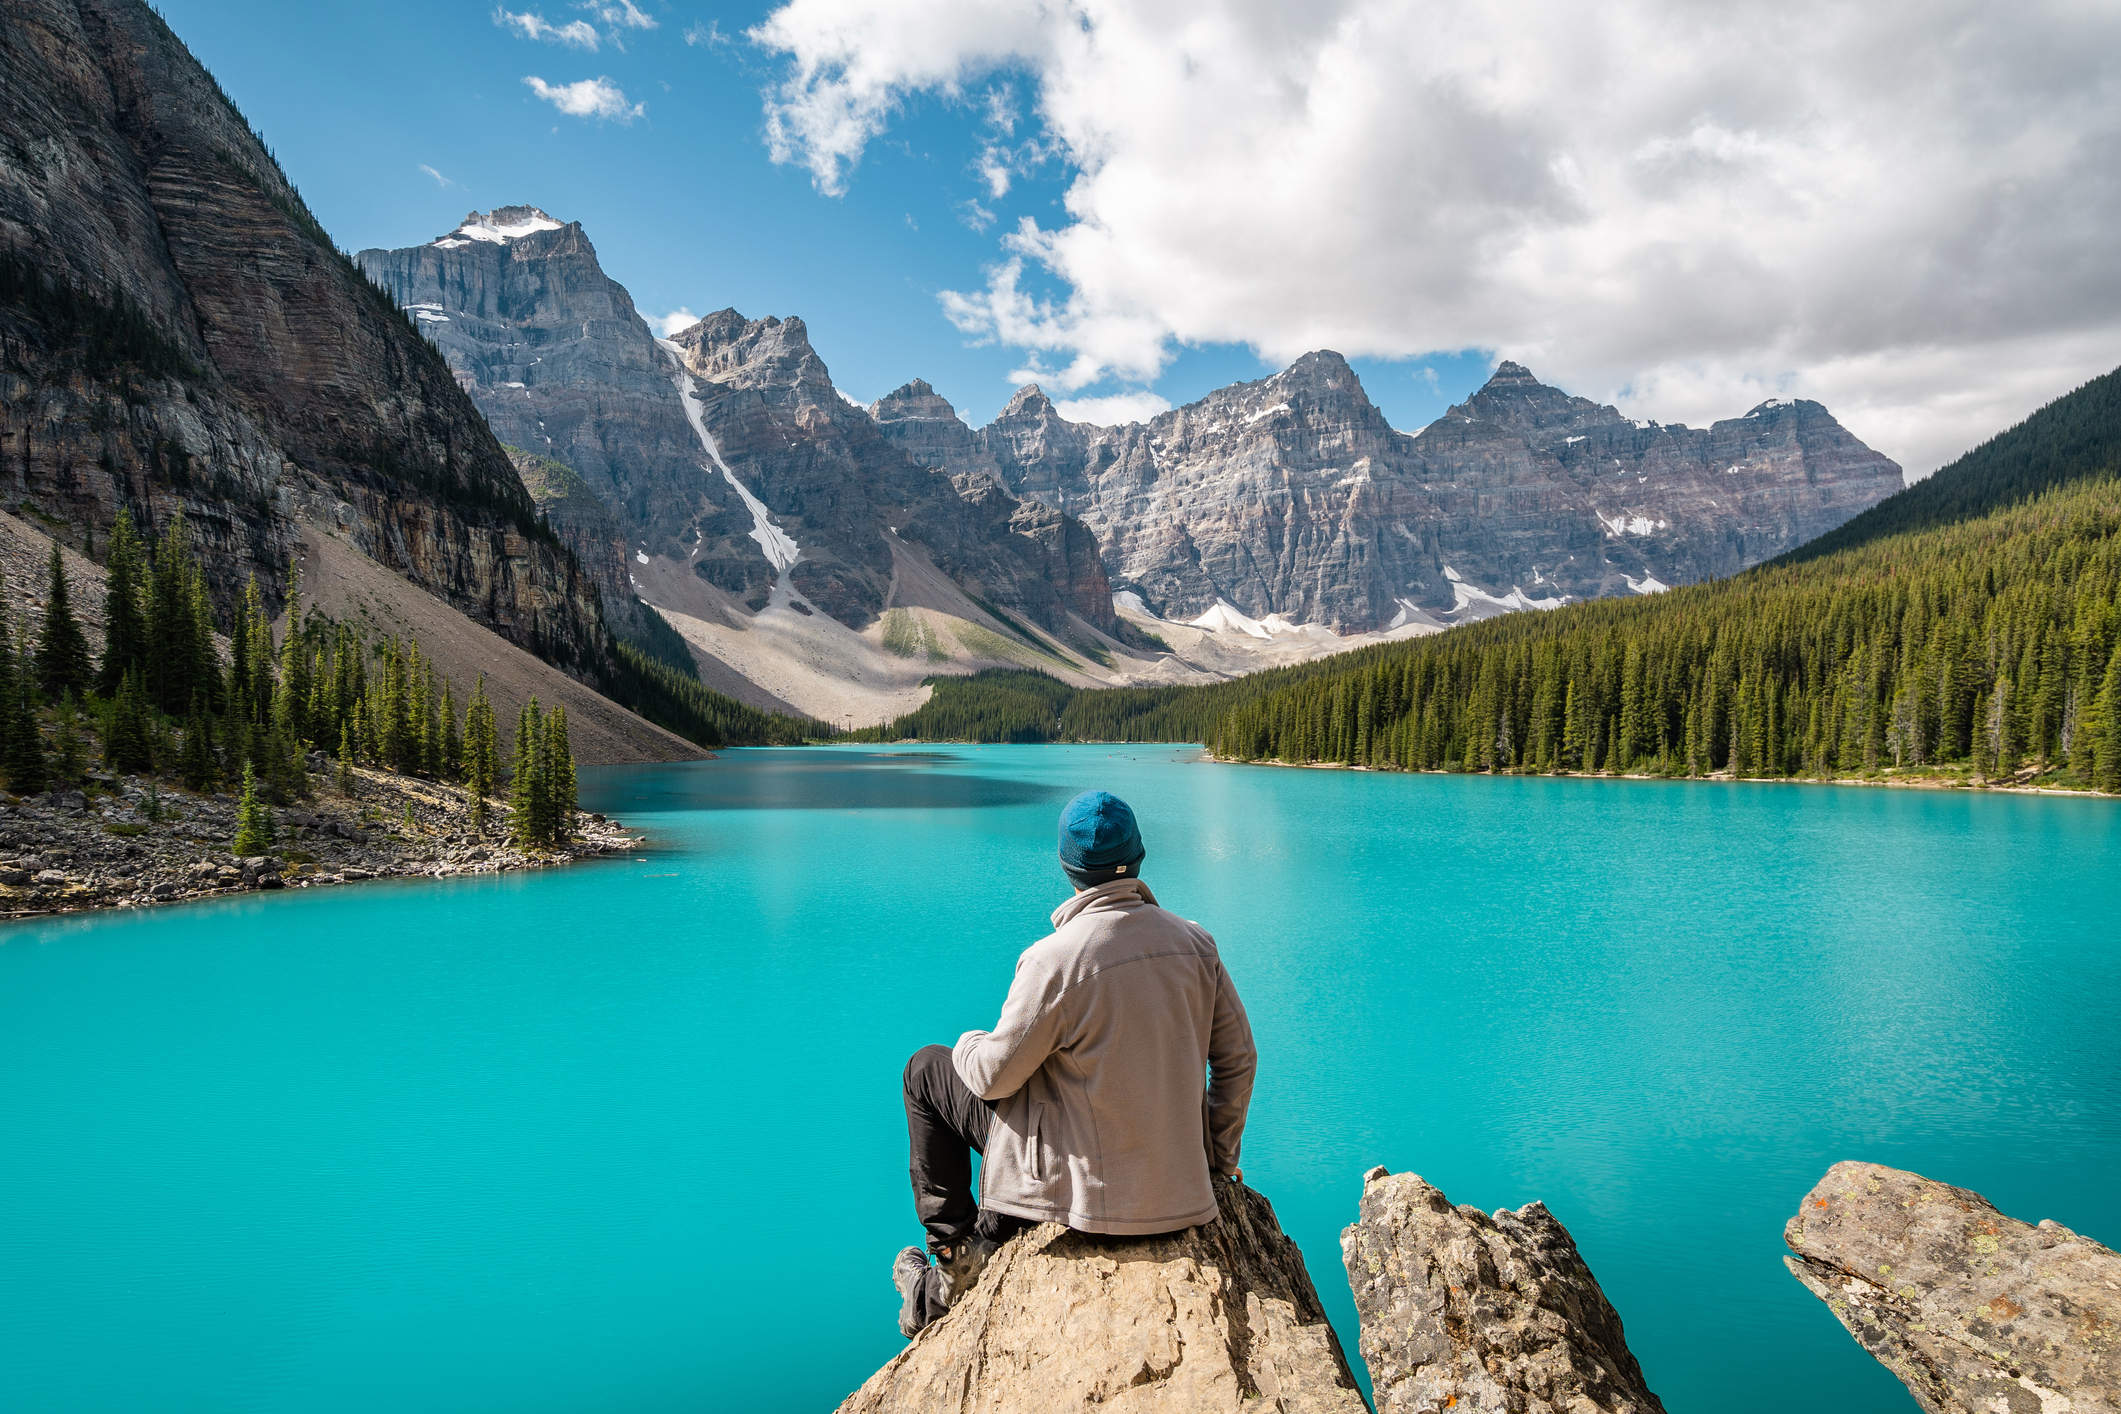 Canada's in the top 5 destinations this year. Moraine Lake during summer in Banff National Park, Alberta, Canada.